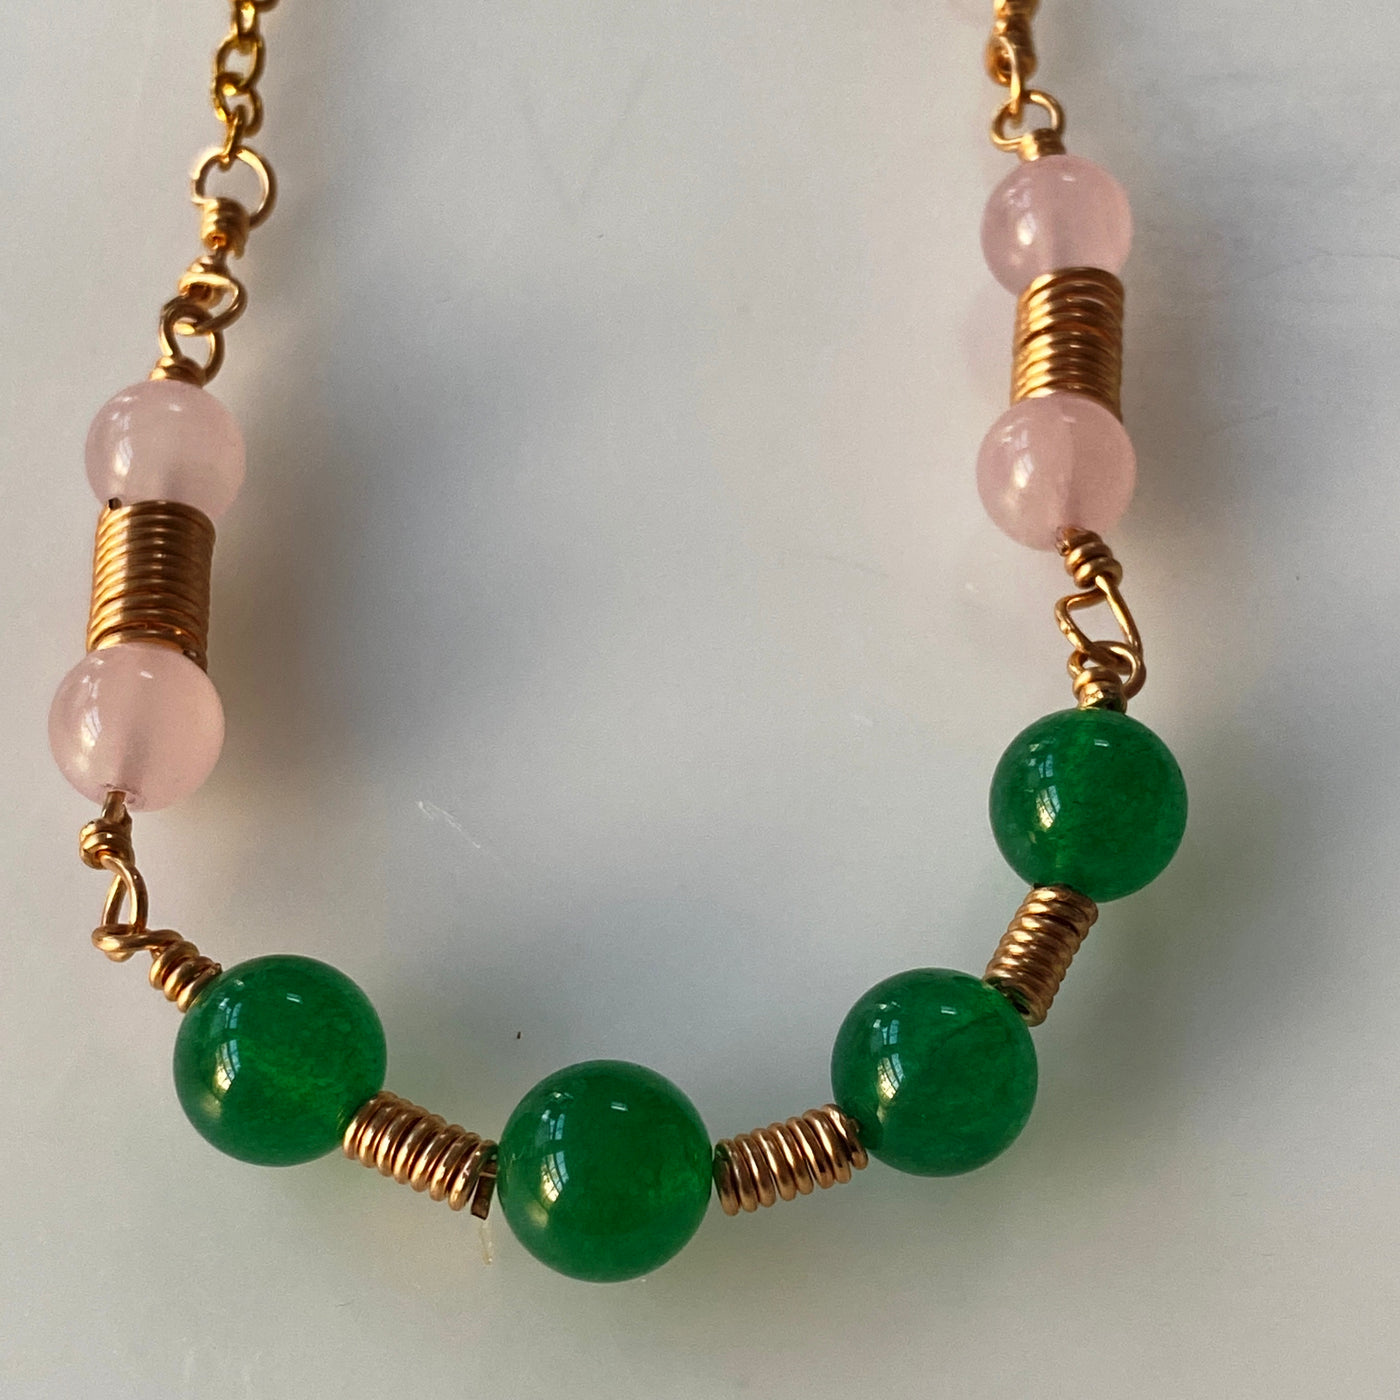 Necklace, Green calchedony, rose quartz and wire chain